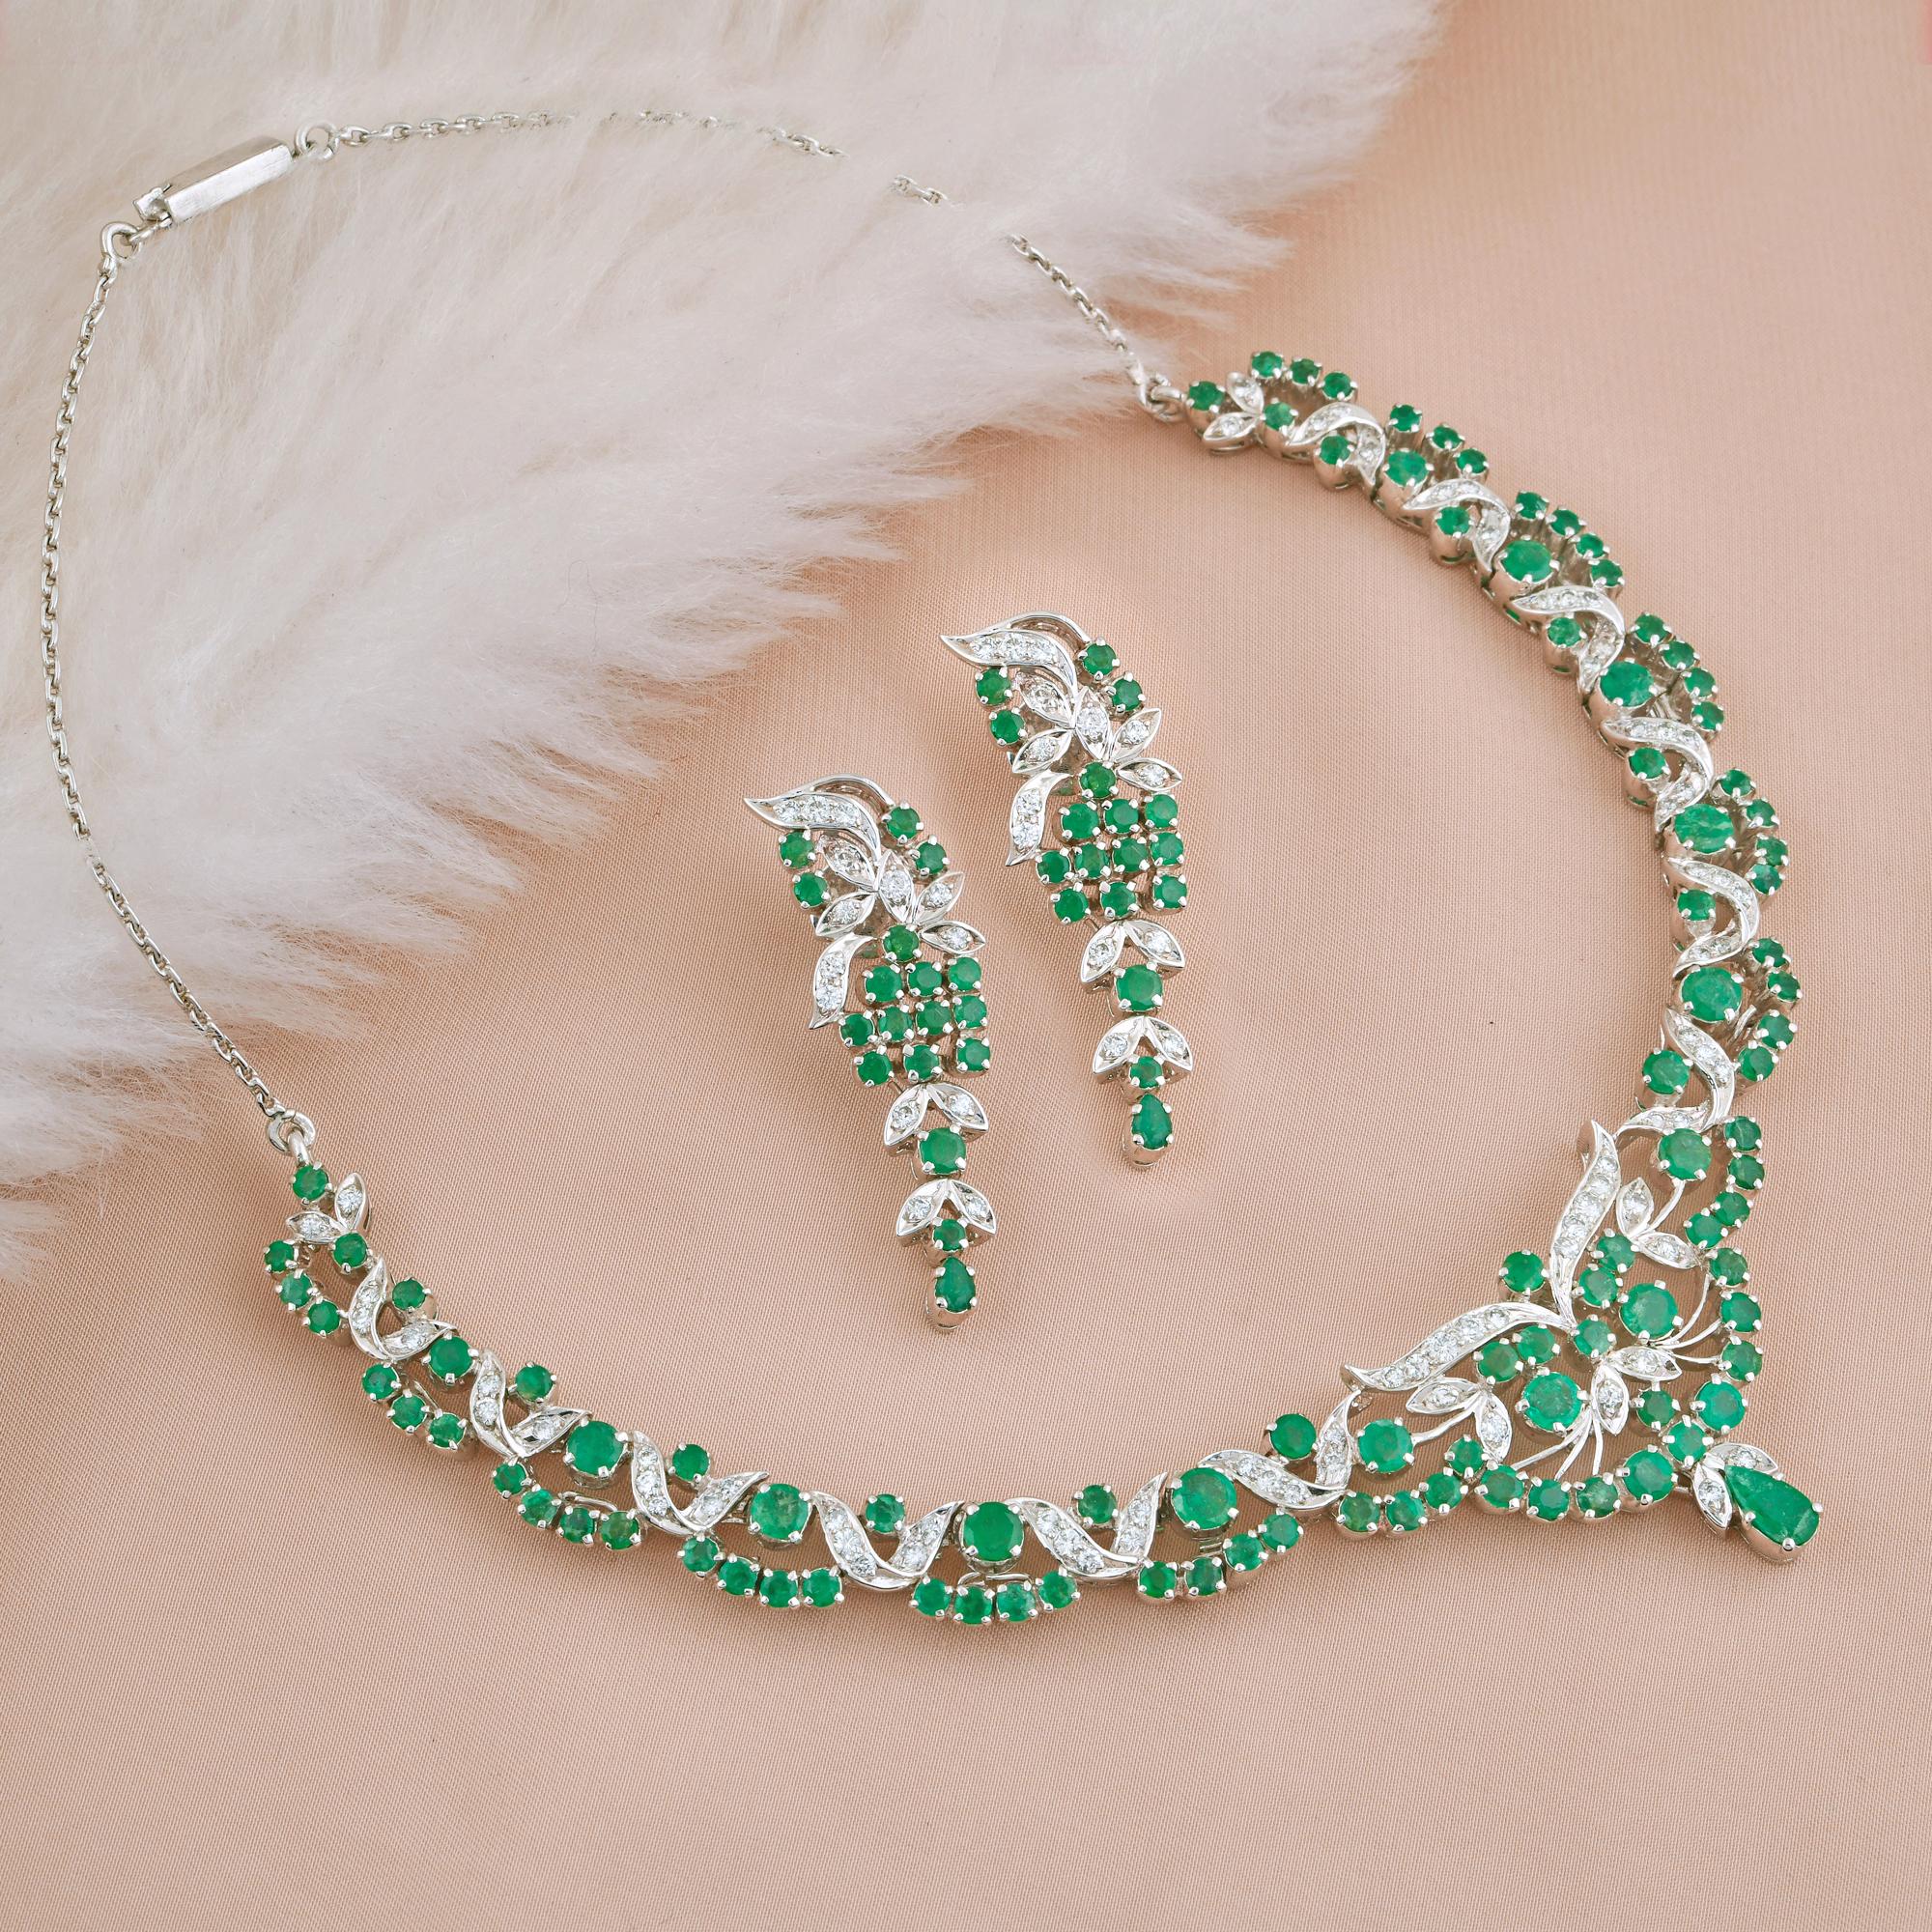 Stone Name :- Diamond / Emerald
Stone Shape :- Round / Pear
Making :- Handmade
Stone Treatment :- Natural
Making :- Handmade
Item Code :- CNS-1023
Metal :- Silver
Necklace Length :- 16 Inches Approx.

✦ Sizing
.....................
We can adjust